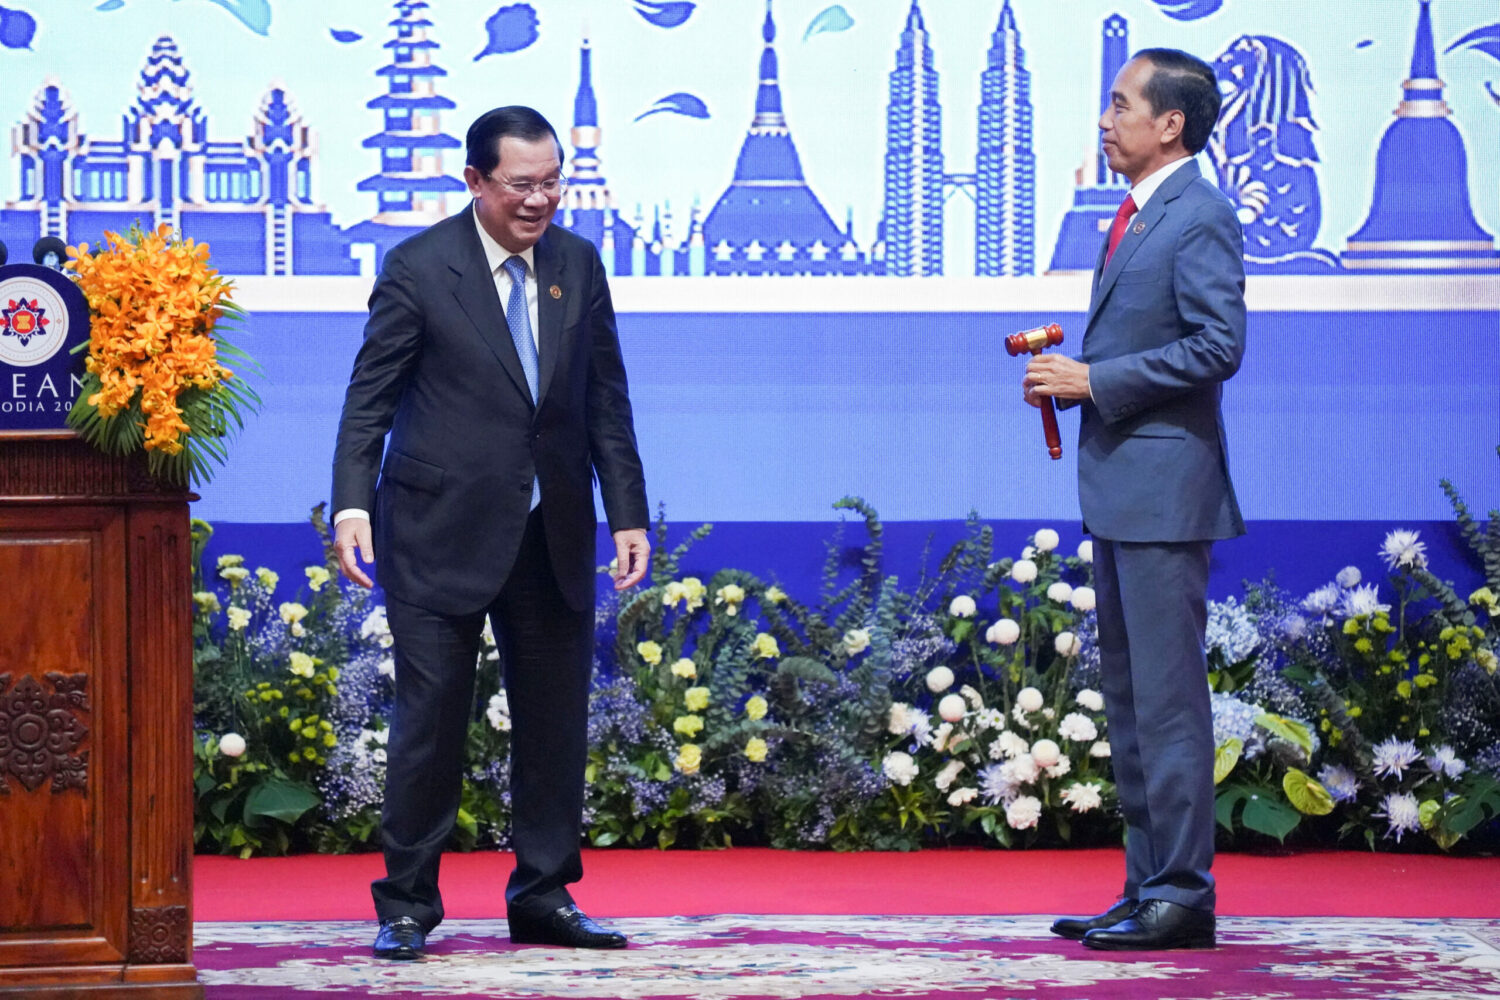 Cambodian Prime Minister Hun Sen hands over the Asean chairmanship gavel to Indonesian President Joko Widodo at the Asean Summit's closing ceremony in Phnom Penh on November 13, 2022. (Cindy Liu/Reuters)